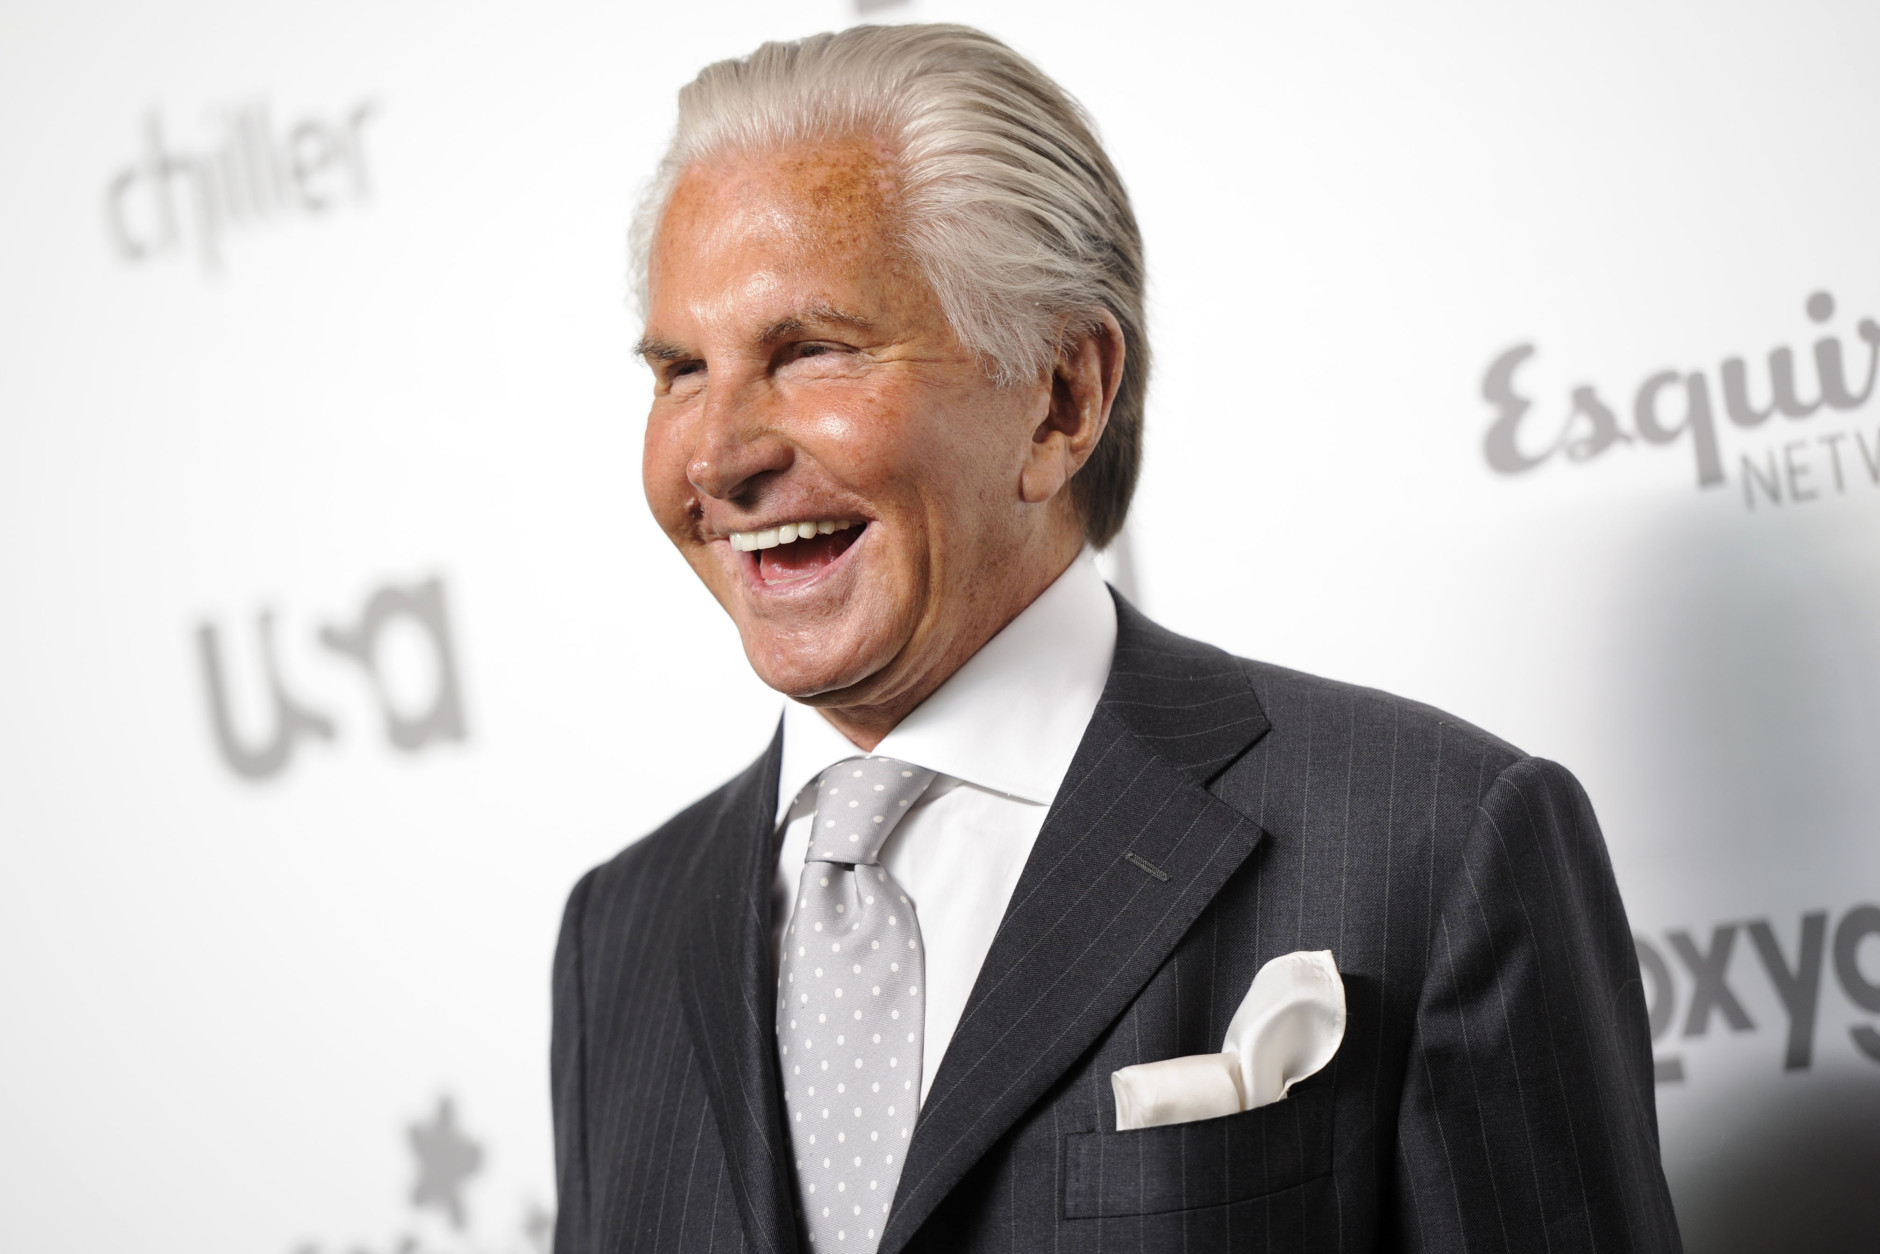 Actor George Hamilton attends the NBCUniversal Cable Entertainment 2015 Upfront at The Jacob Javits Center on Thursday, May 14, 2015, in New York. He celebrates his birthday Aug. 12. (Photo by Evan Agostini/Invision/AP)